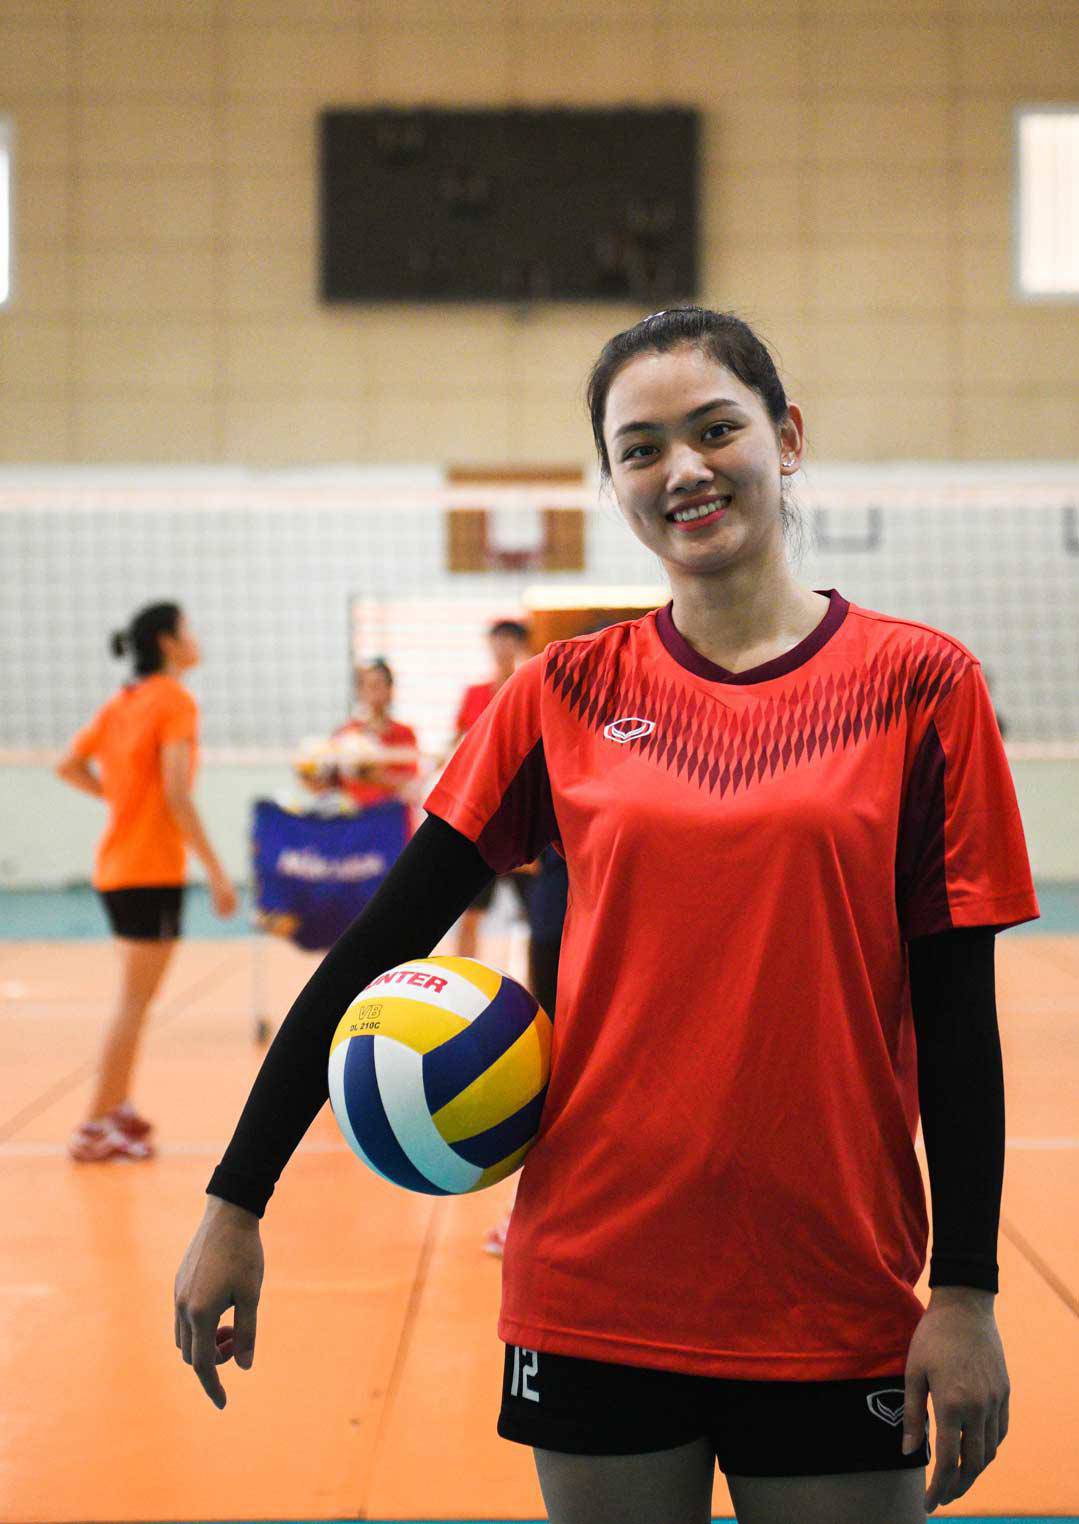 Hot girl volleyball is called the new generation beauty that causes fever at SEA Games 31 - 3